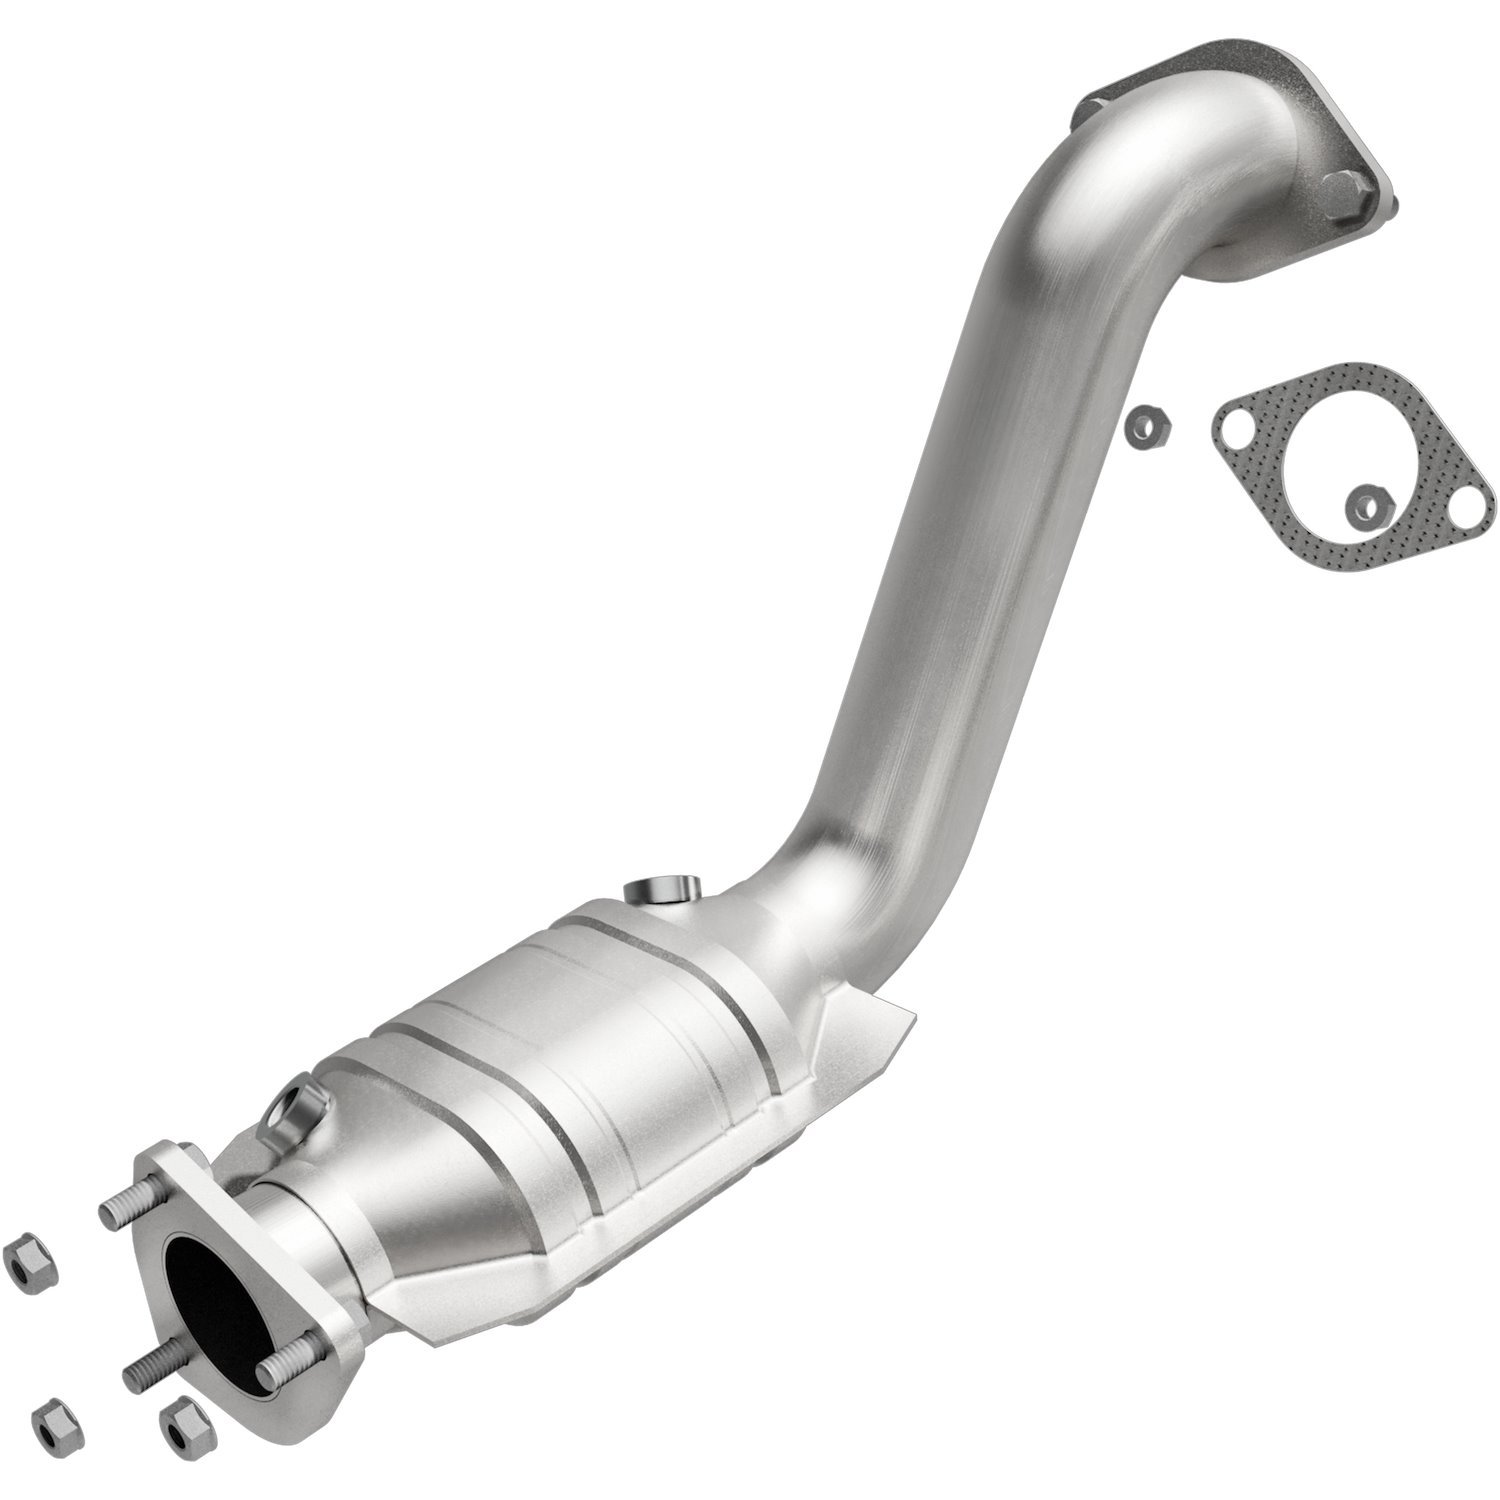 2002-2004 Ford Focus OEM Grade Federal / EPA Compliant Direct-Fit Catalytic Converter